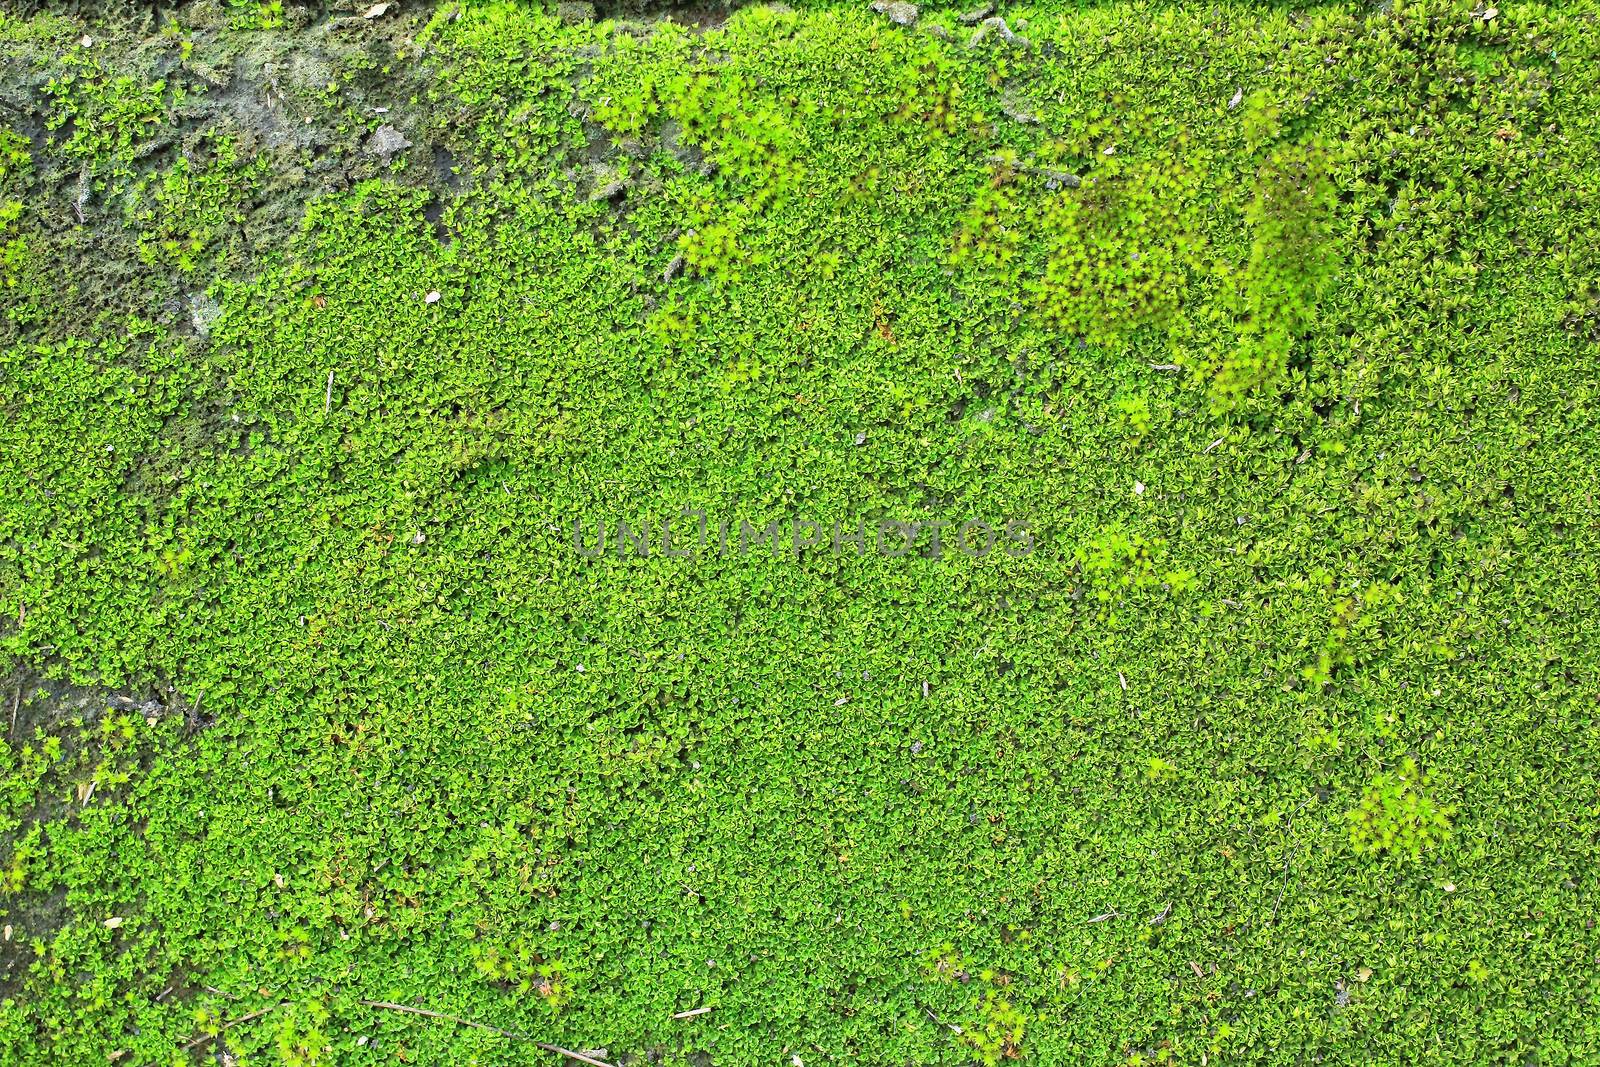 Background of old wall brick with moss